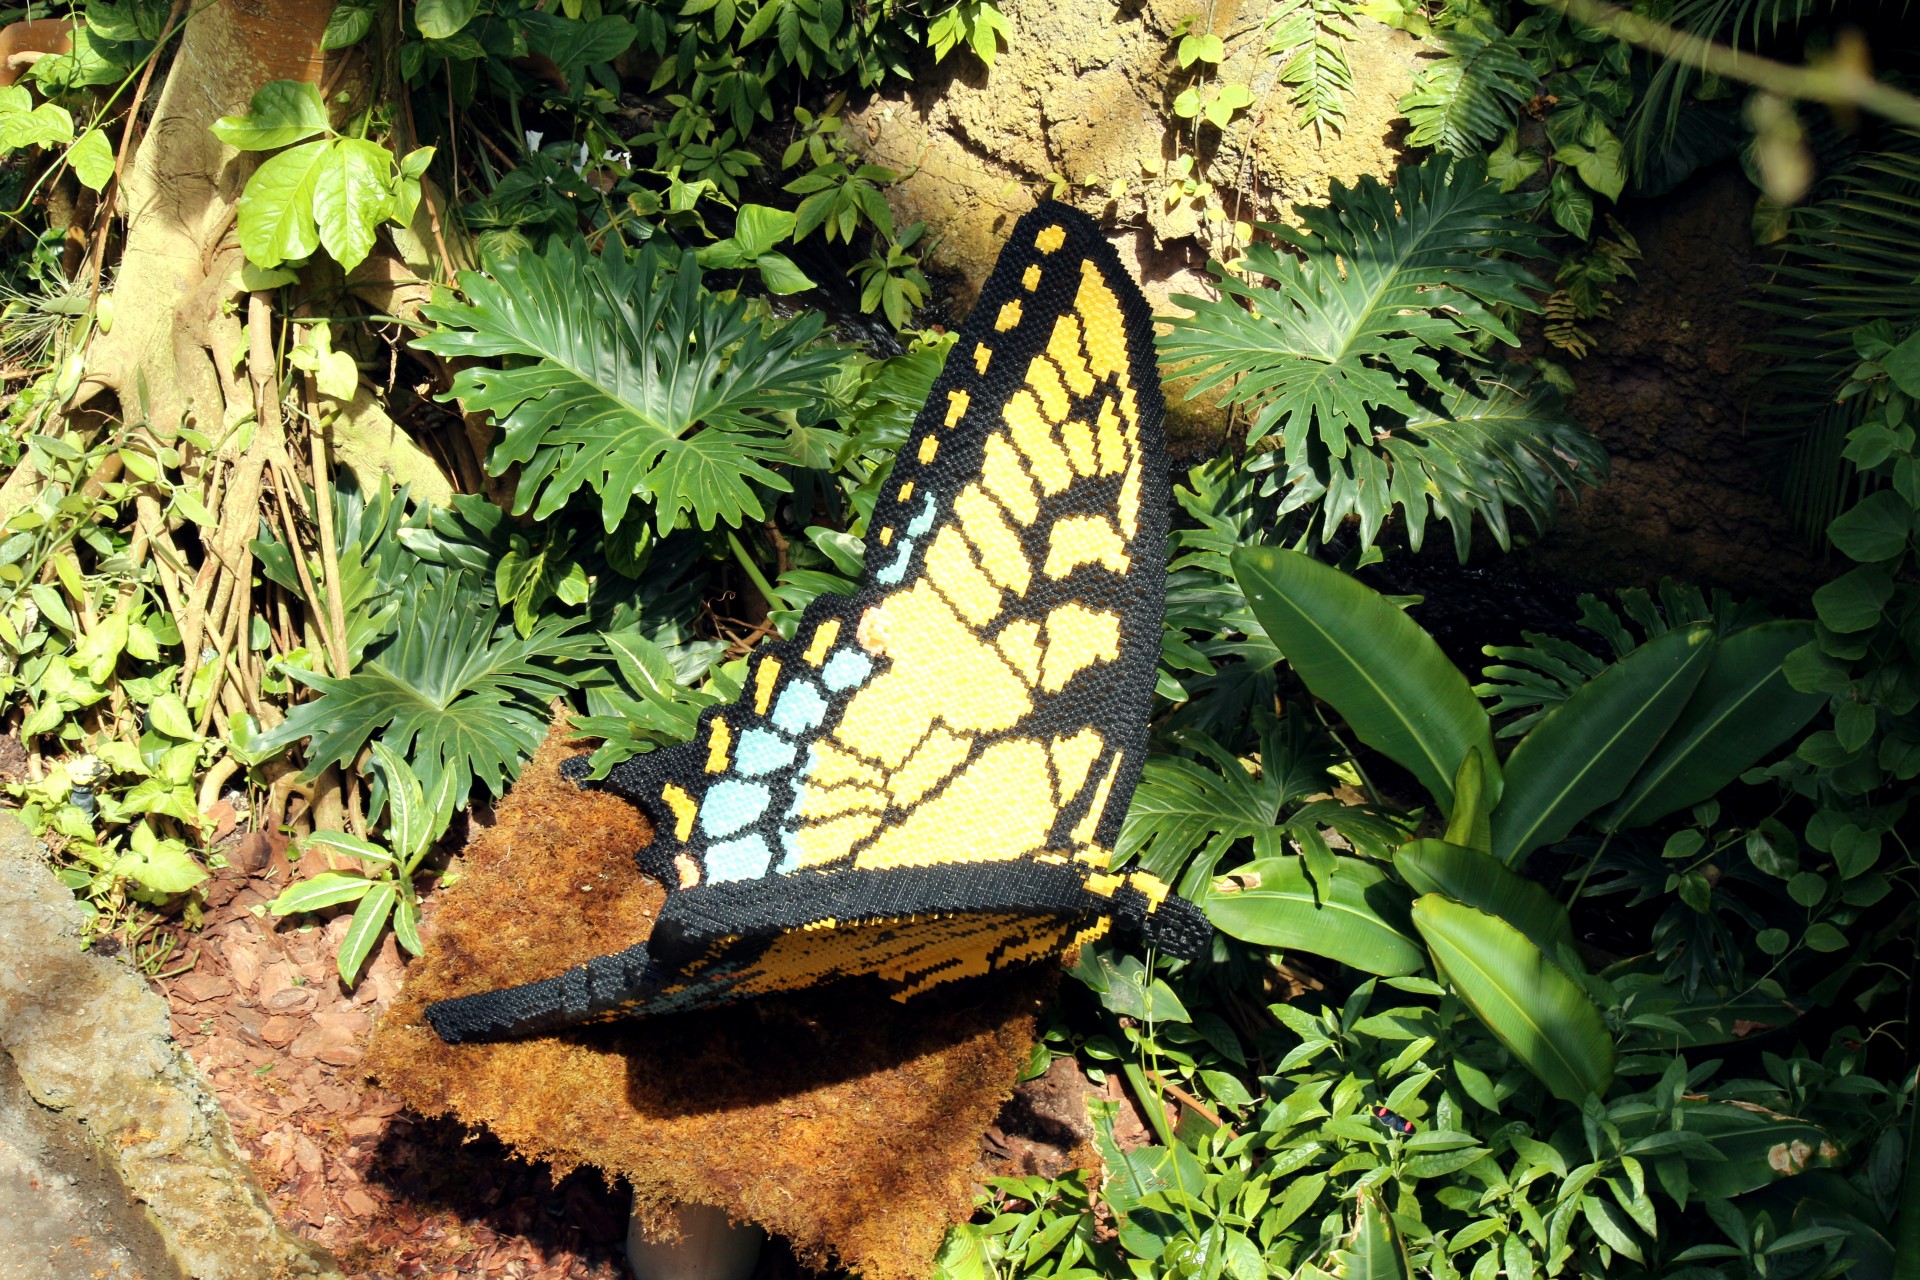 Huge lego butterfly on display at Cleveland Botanical Gardens